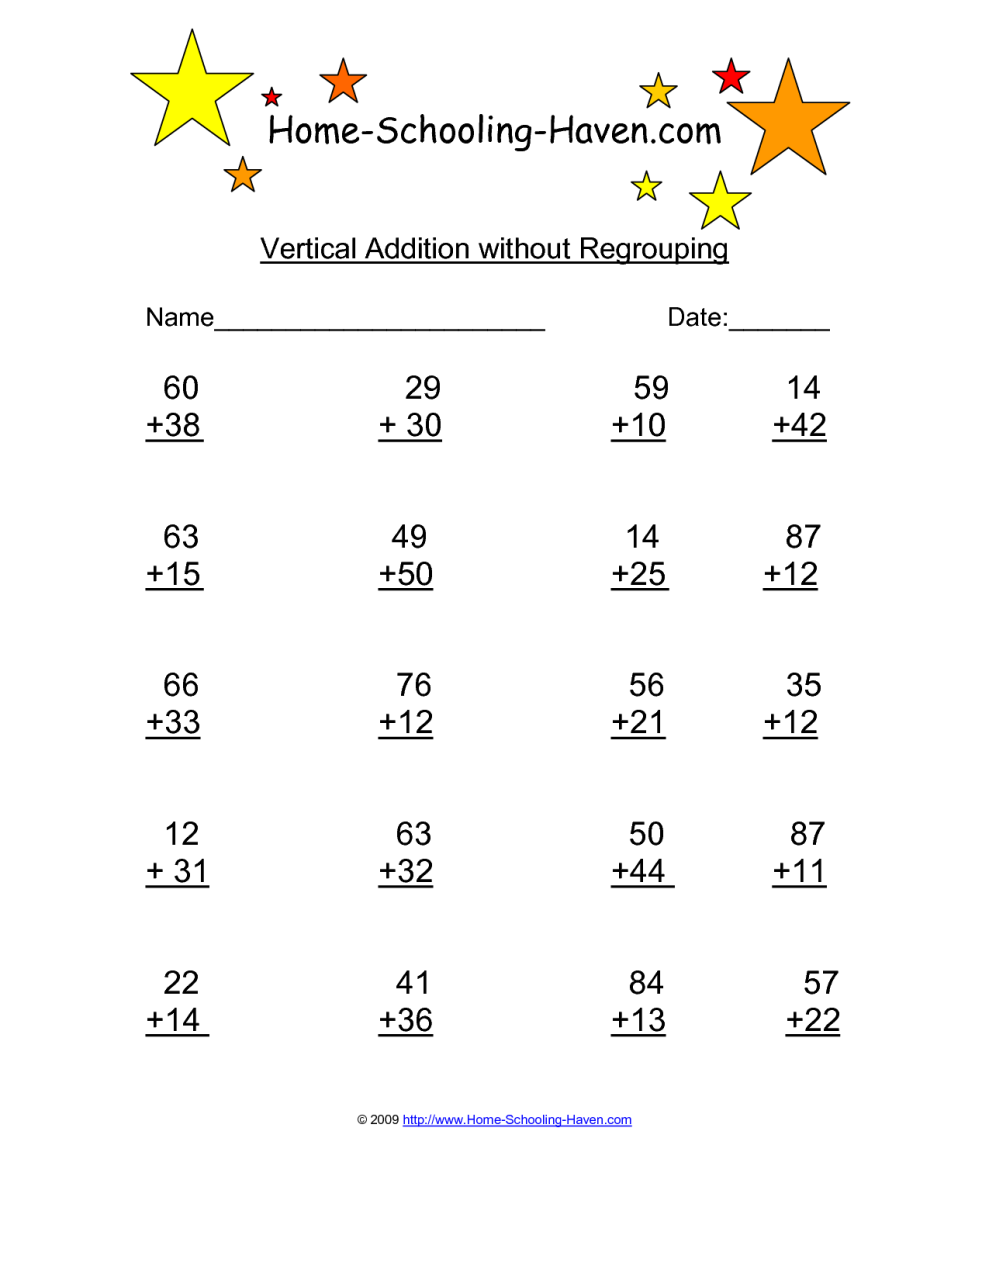 Two And Three Digit Addition With Regrouping Worksheets